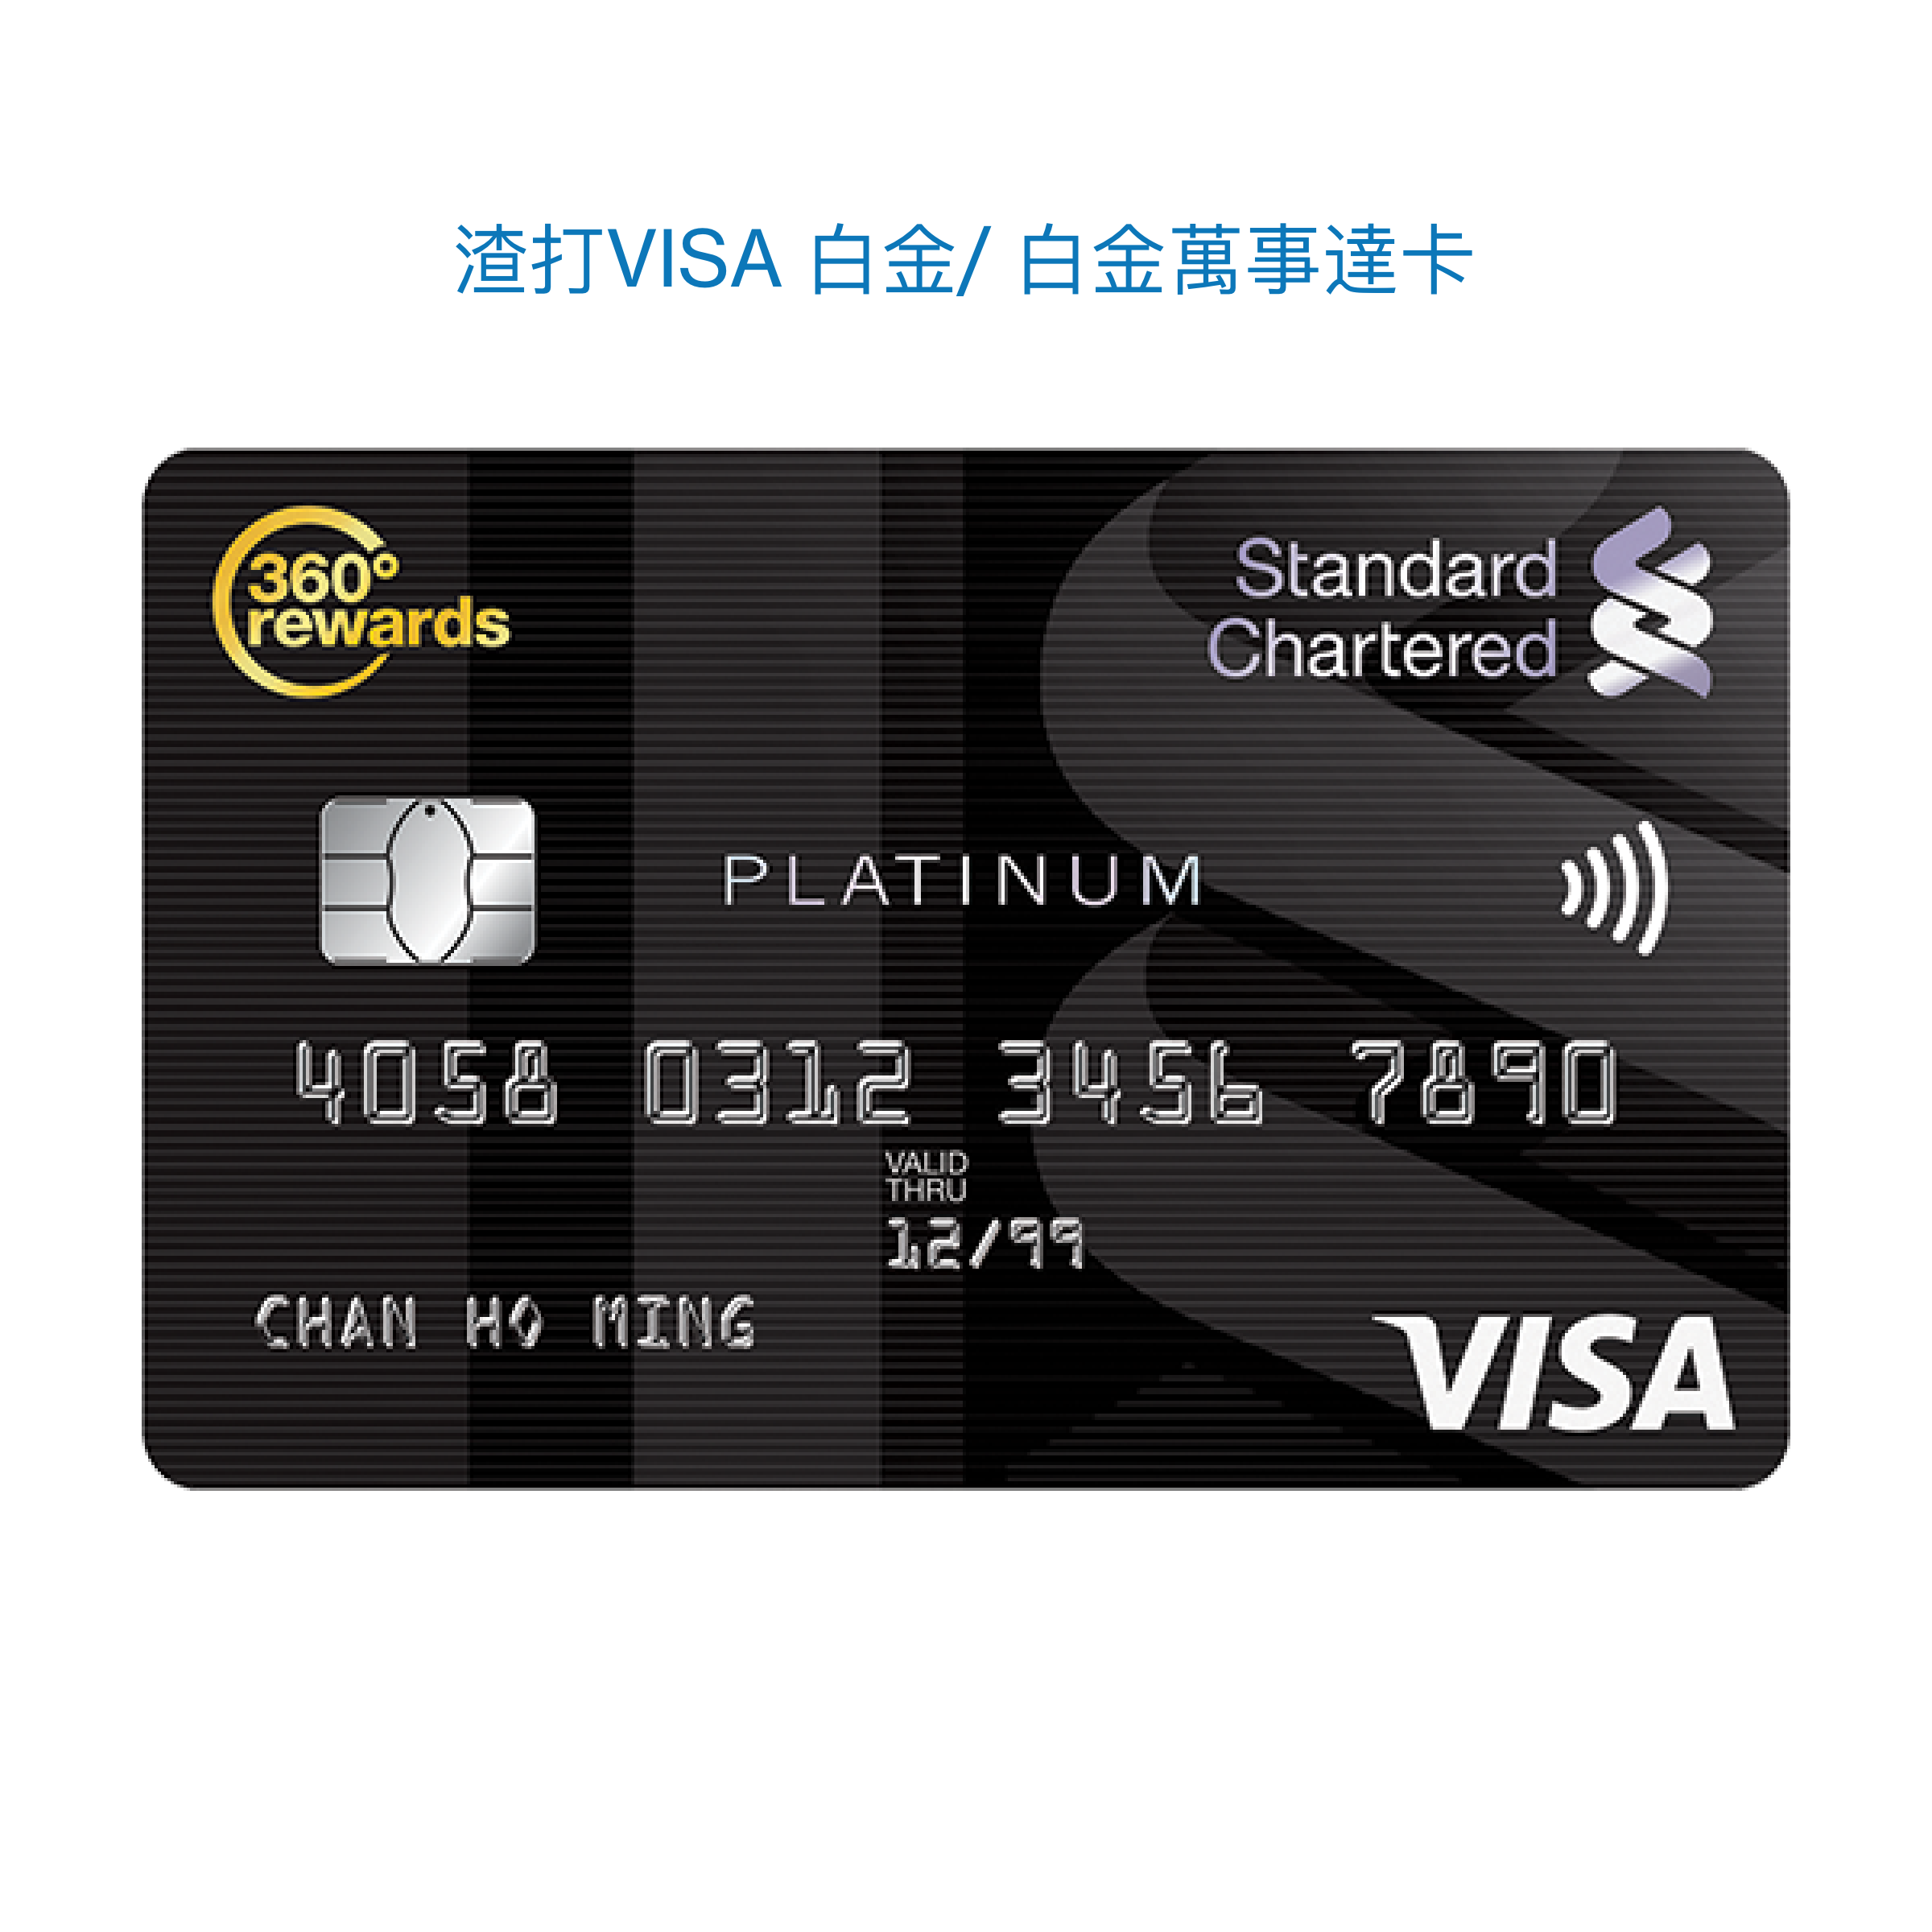 Cc category page – platinum credit card